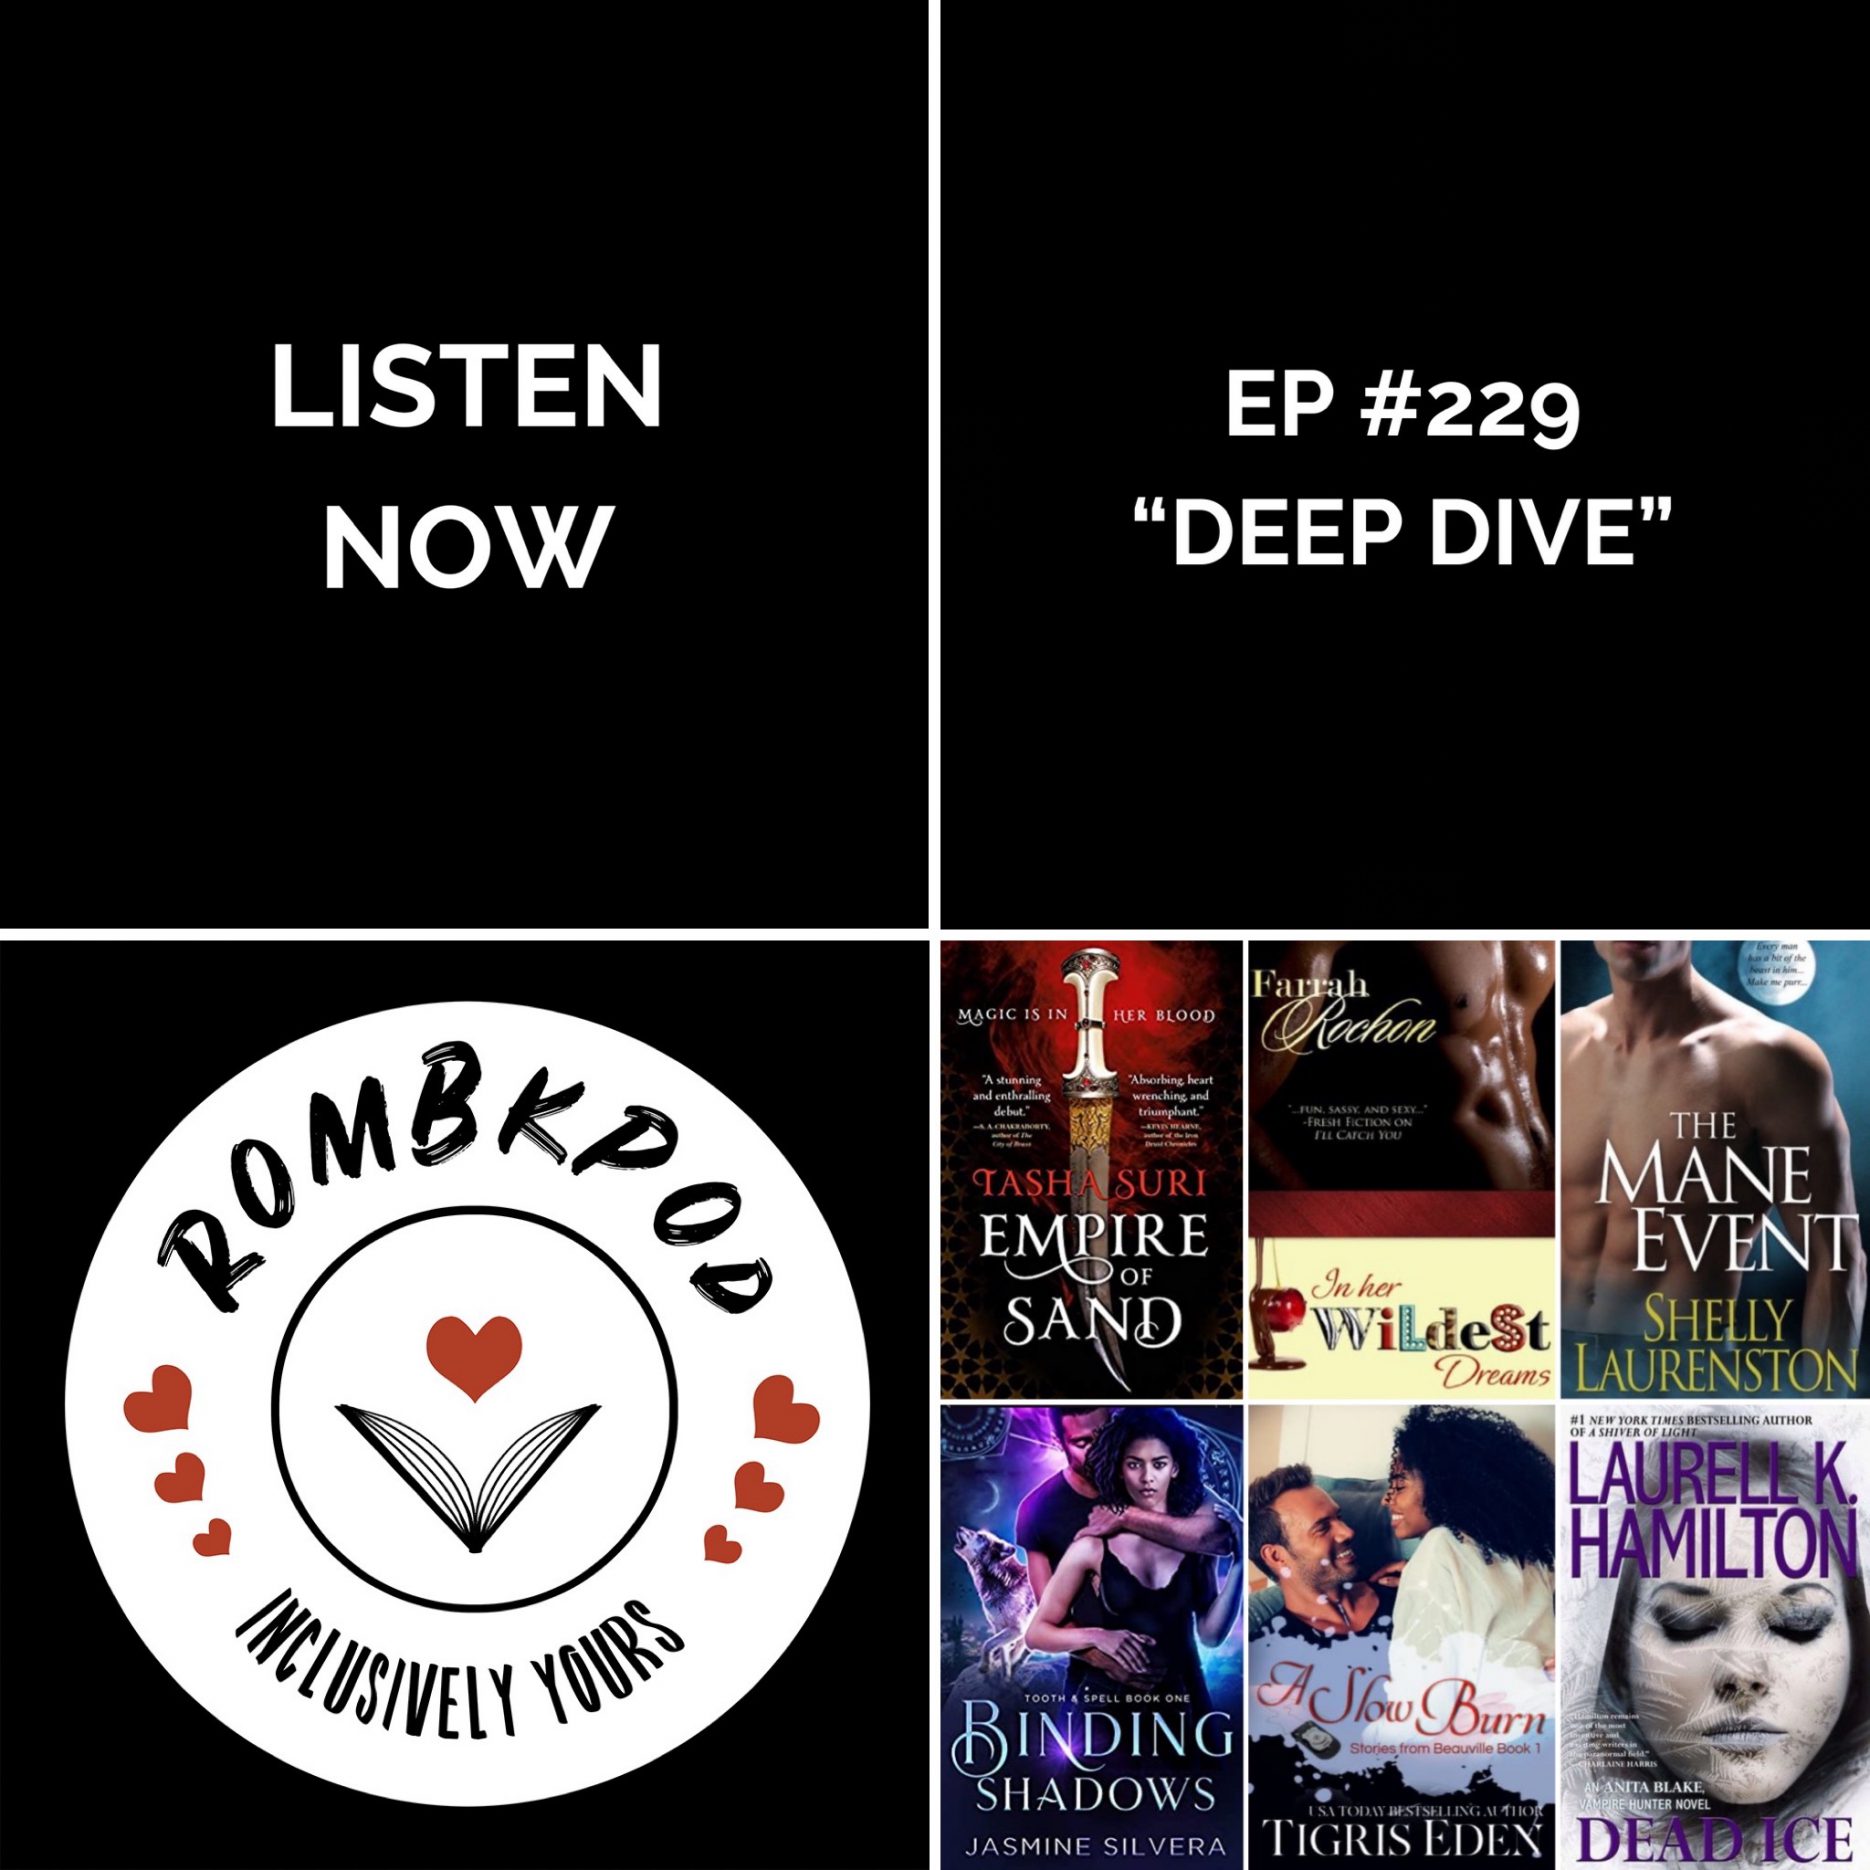 IMAGE: lower left corner, RomBkPod heart logo; lower right corner, ep #229 book cover collage; IMAGE TEXT: Listen Now, ep #229 "Deep Dive"